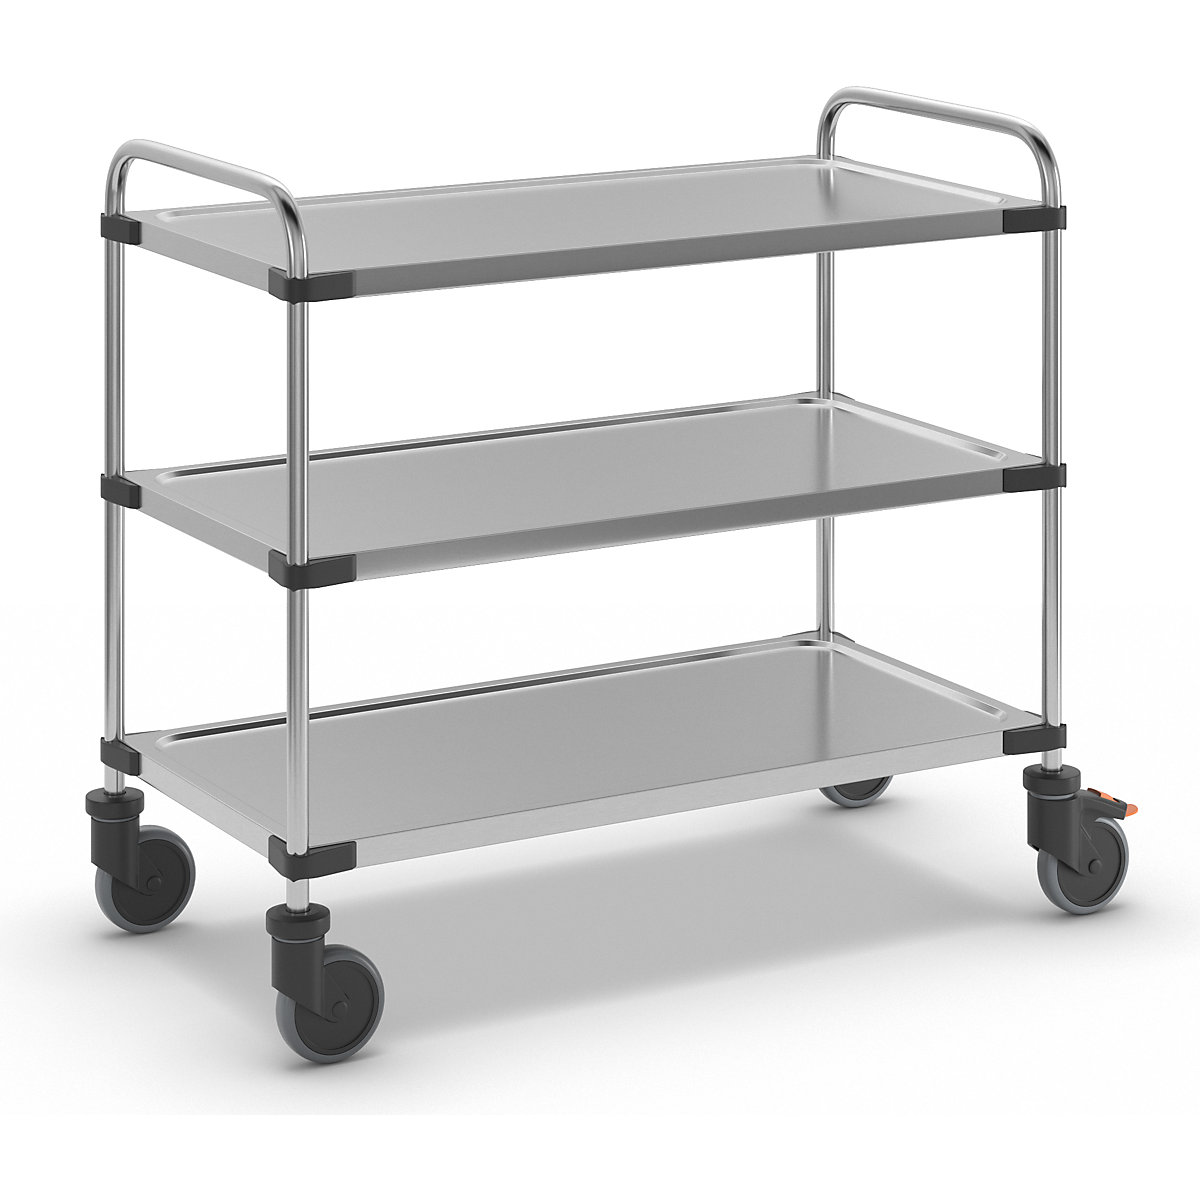 Stainless steel table trolley, with 3 shelves, LxWxH 1070 x 570 x 950 mm, unassembled-11